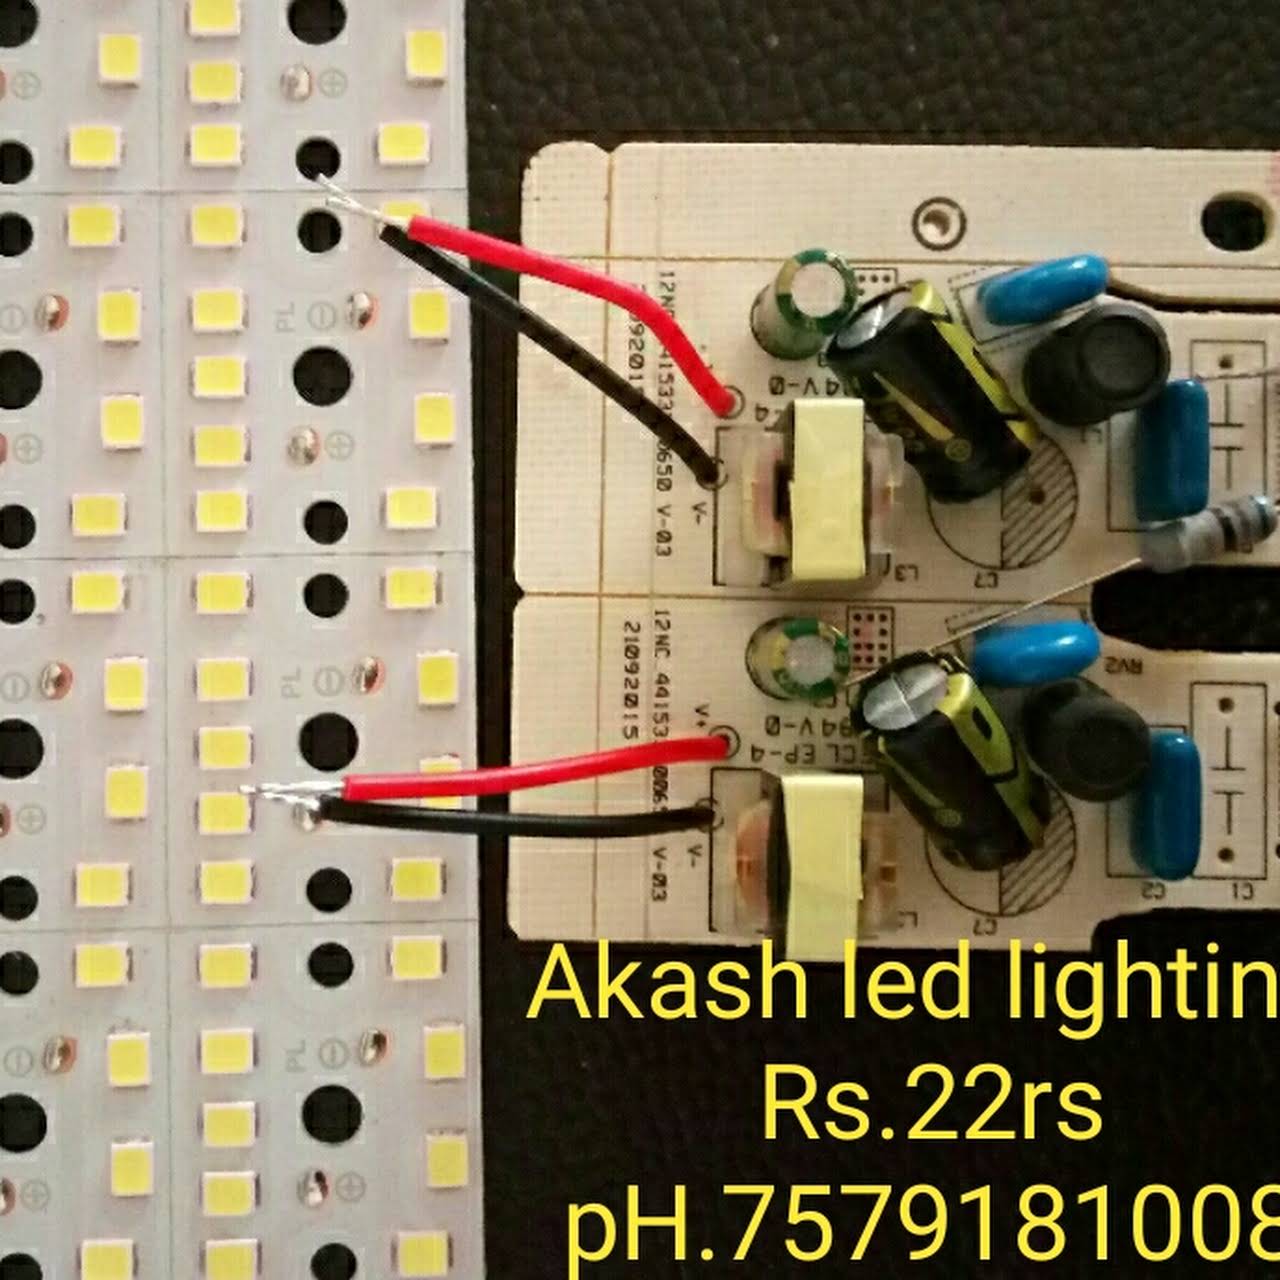 Akash electronics and electricals